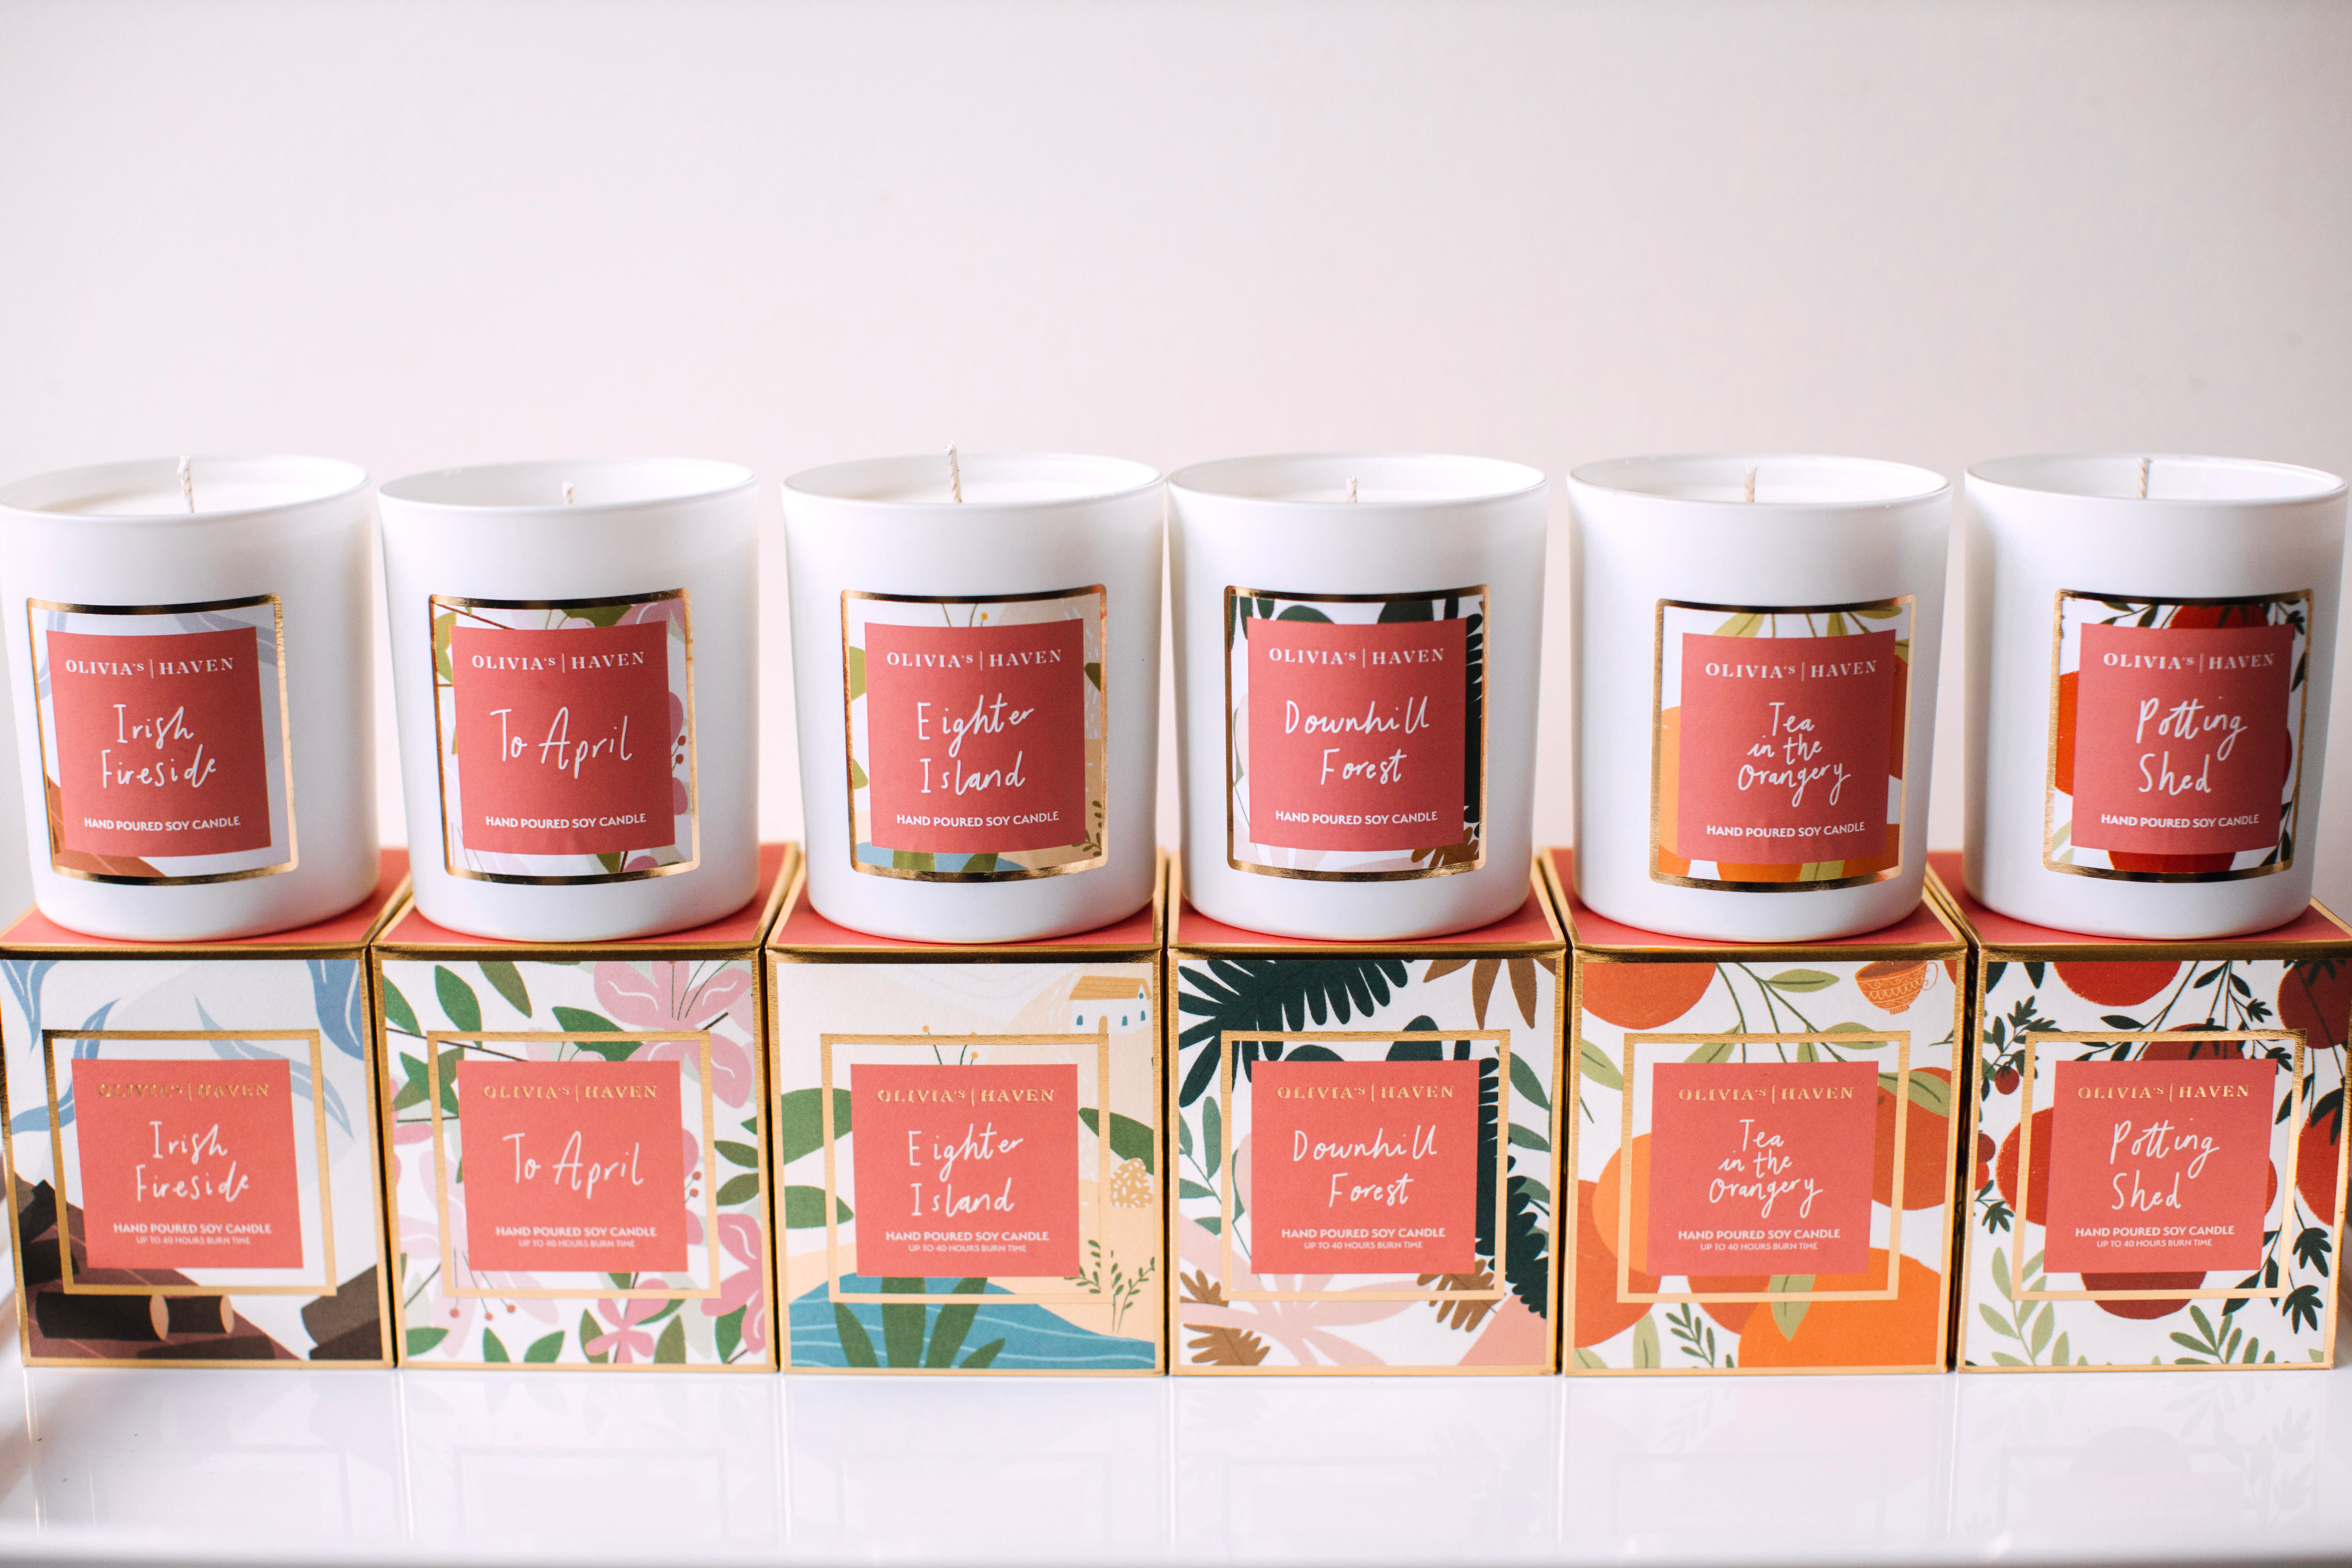 The Olivia's Haven collection of hand-made, soy wax candles